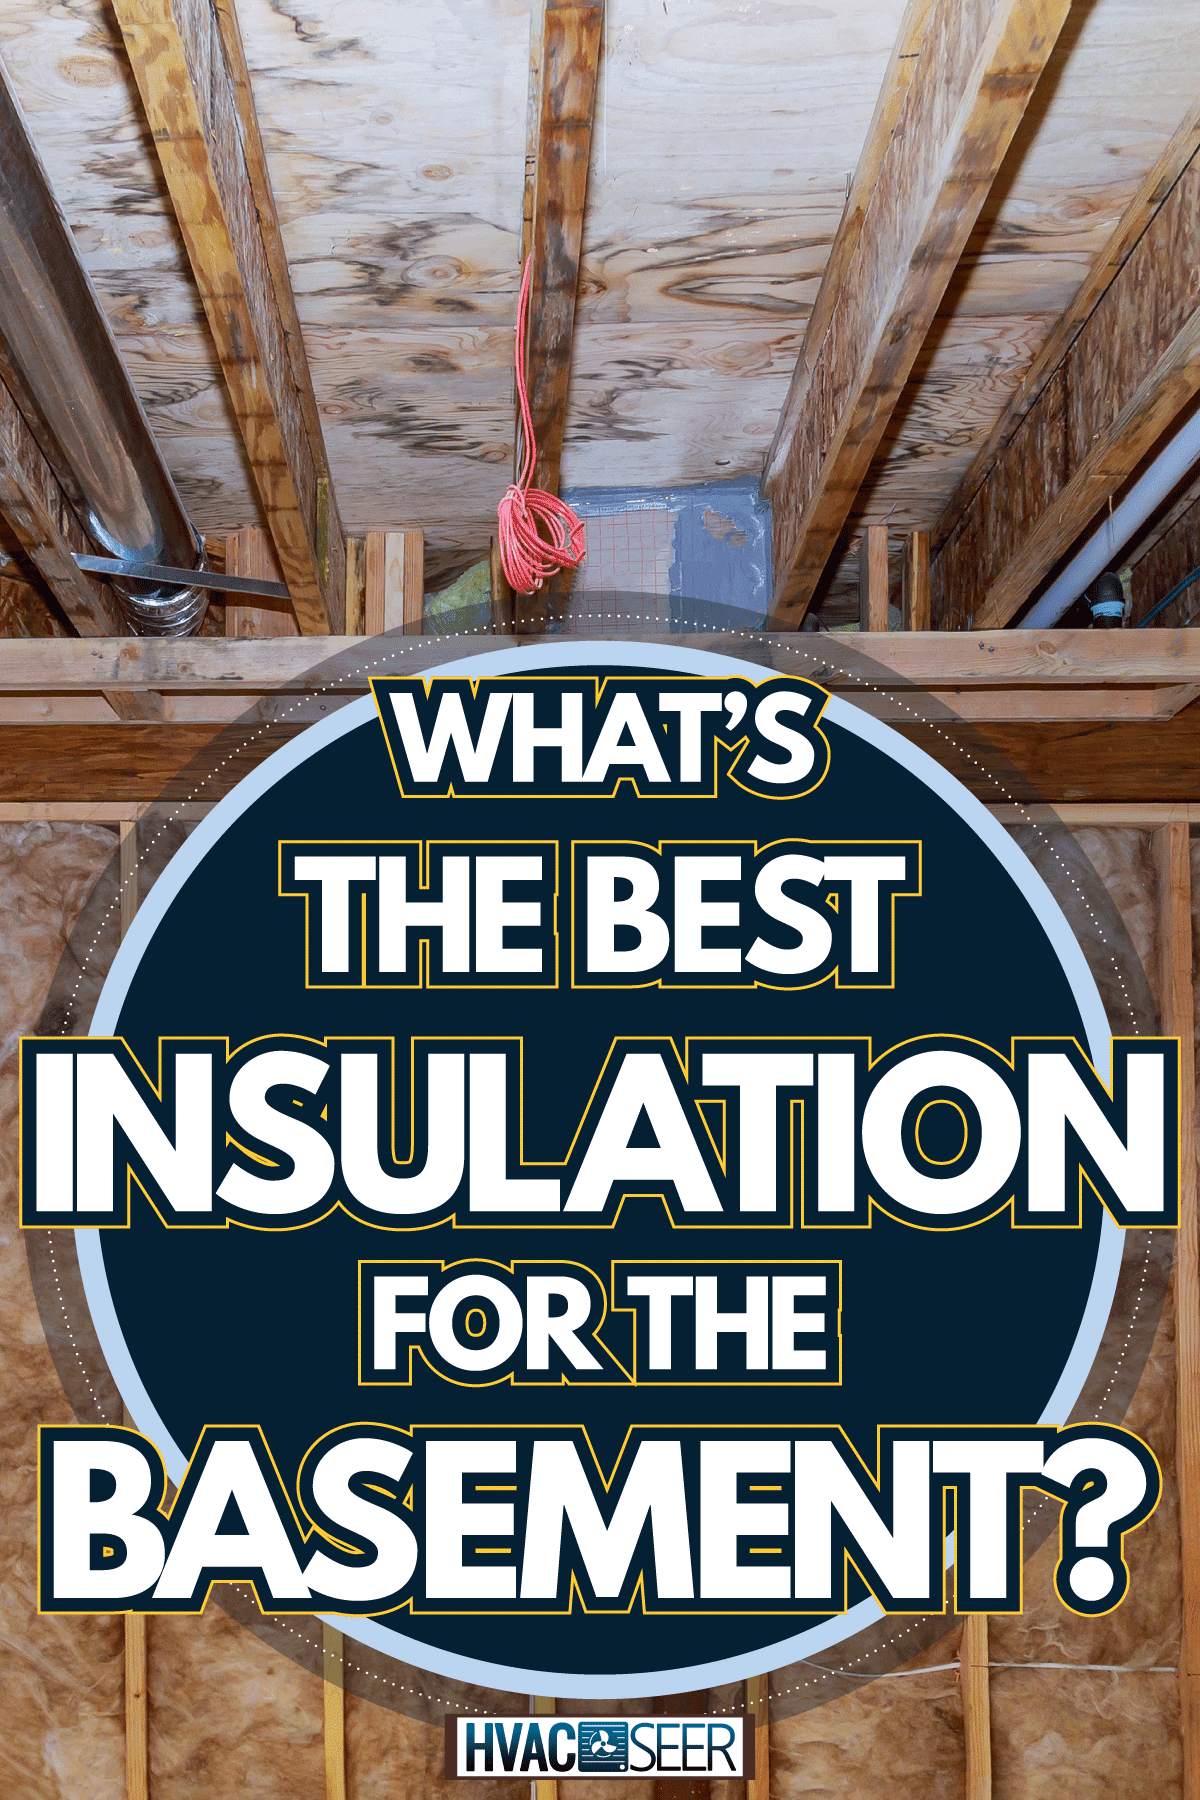 Interior wall insulation of basement with fiberglass cold barrier and insulation material, What's The Best Insulation For The Basement?